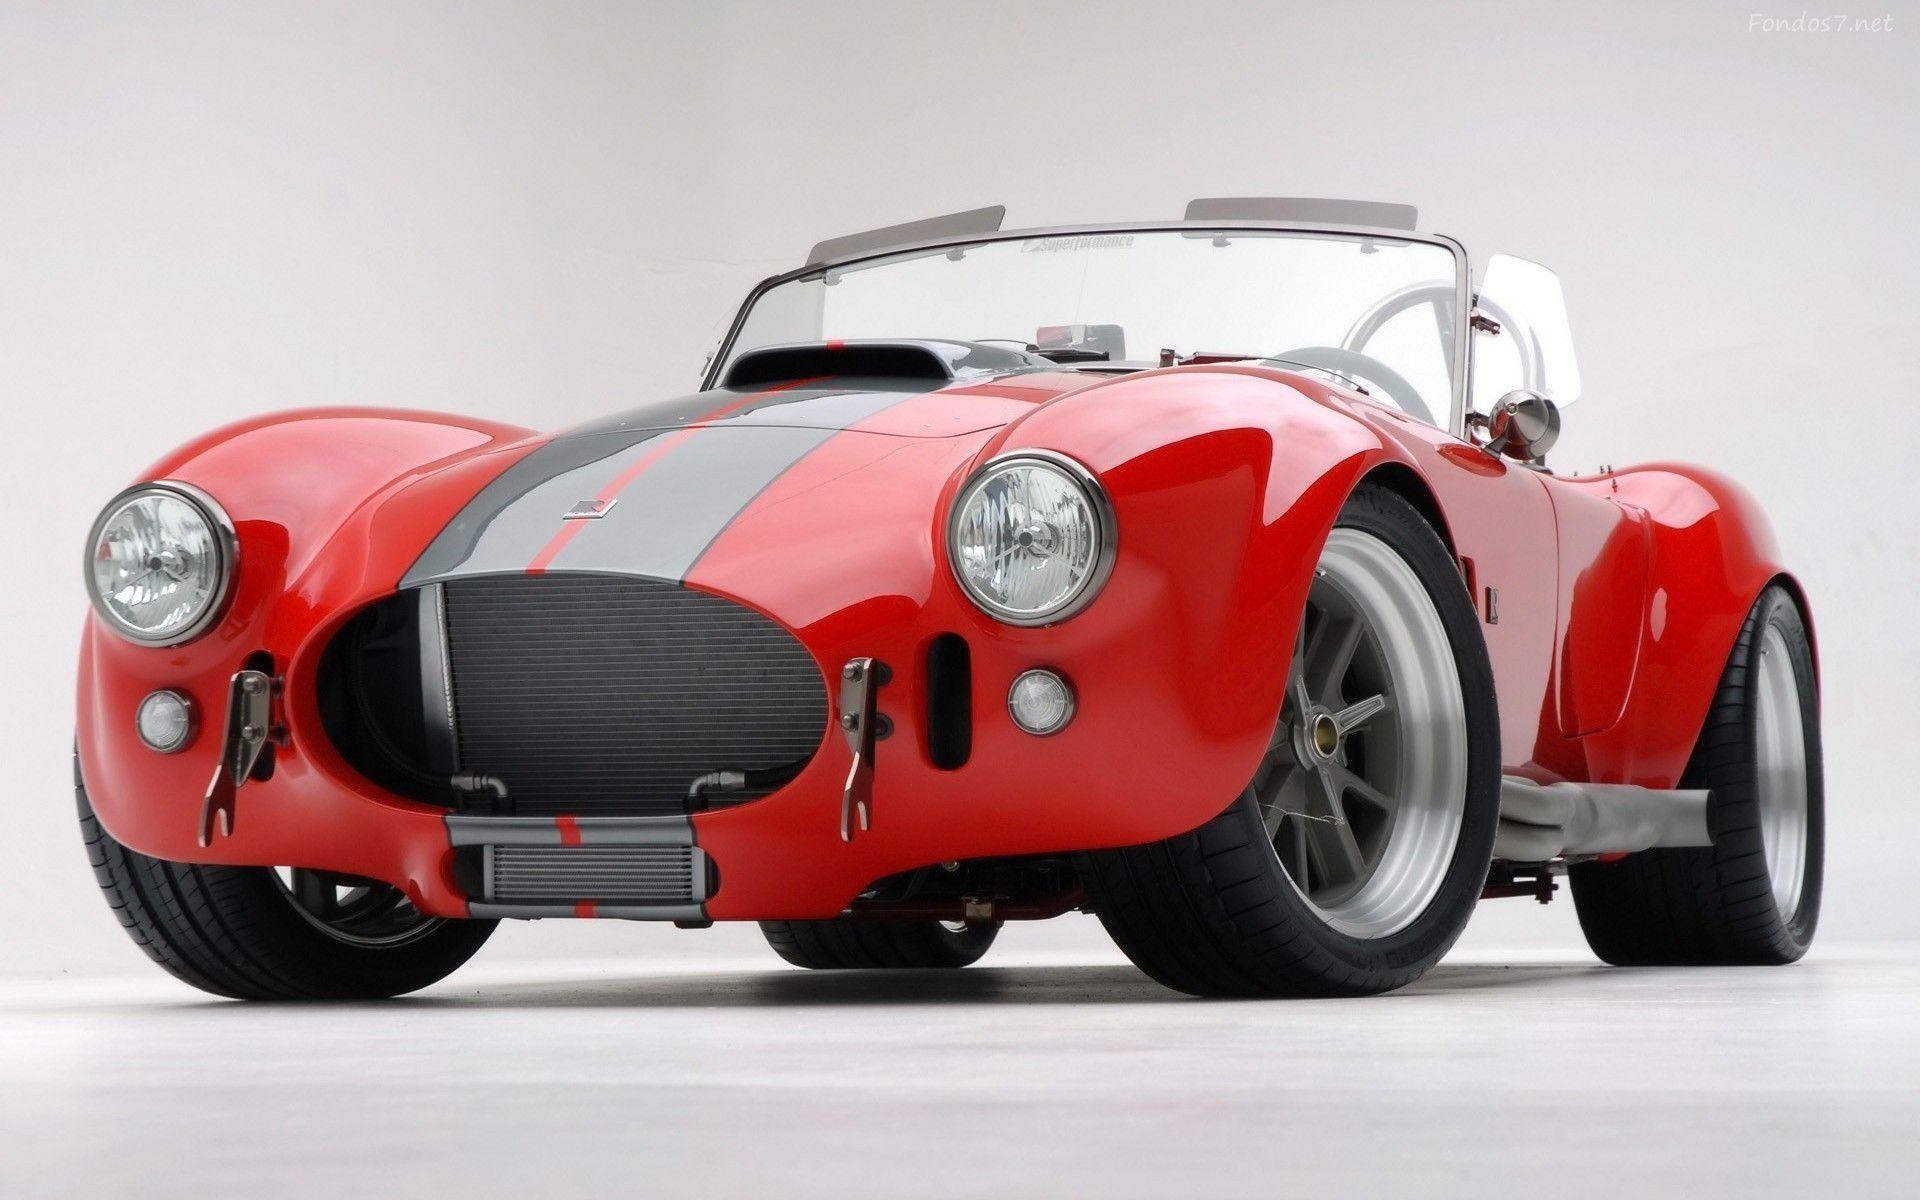 Shelby Cobra Wallpapers Wallpaper Cave